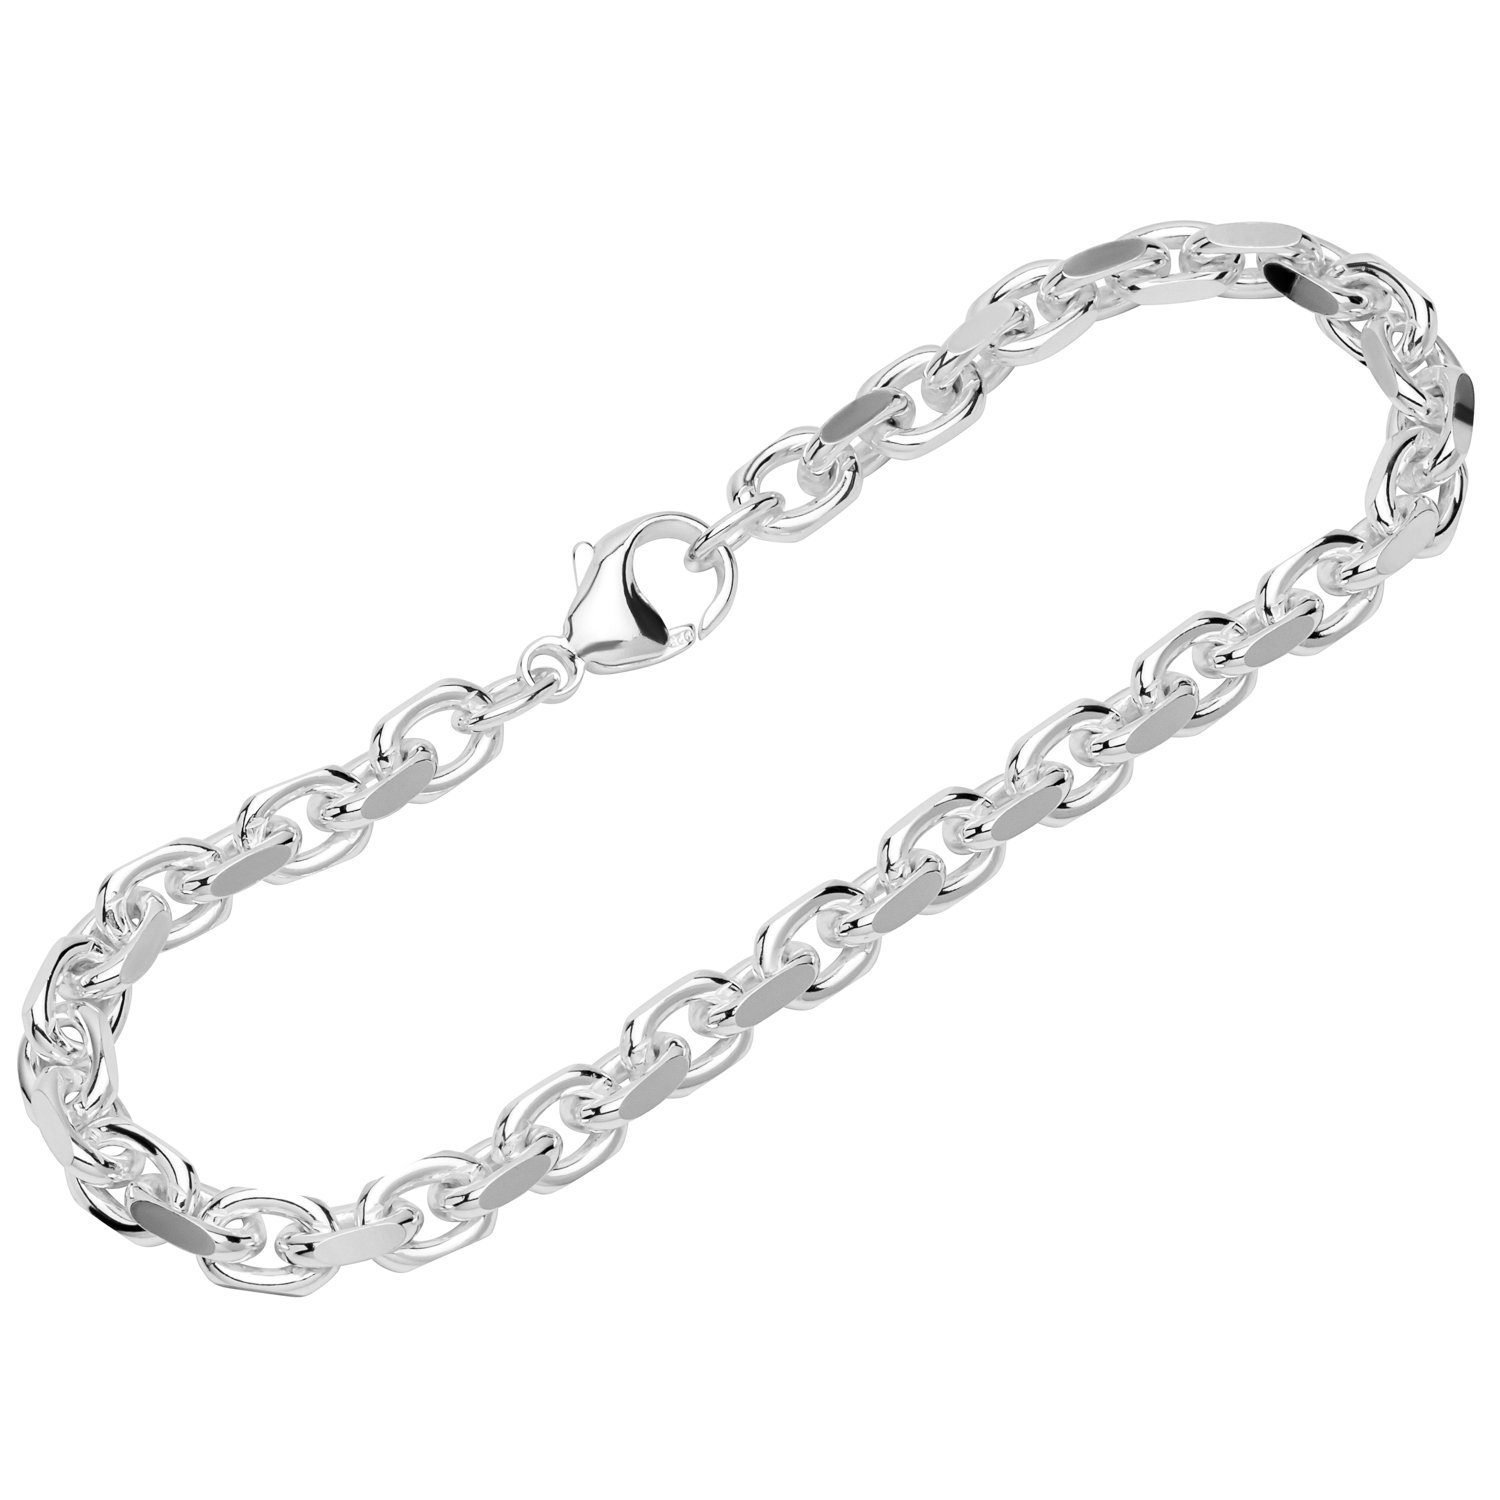 NKlaus Silberarmband Armband 925 Sterling Silber 24cm Ankerkette seitli (1 Stück), Made in Germany